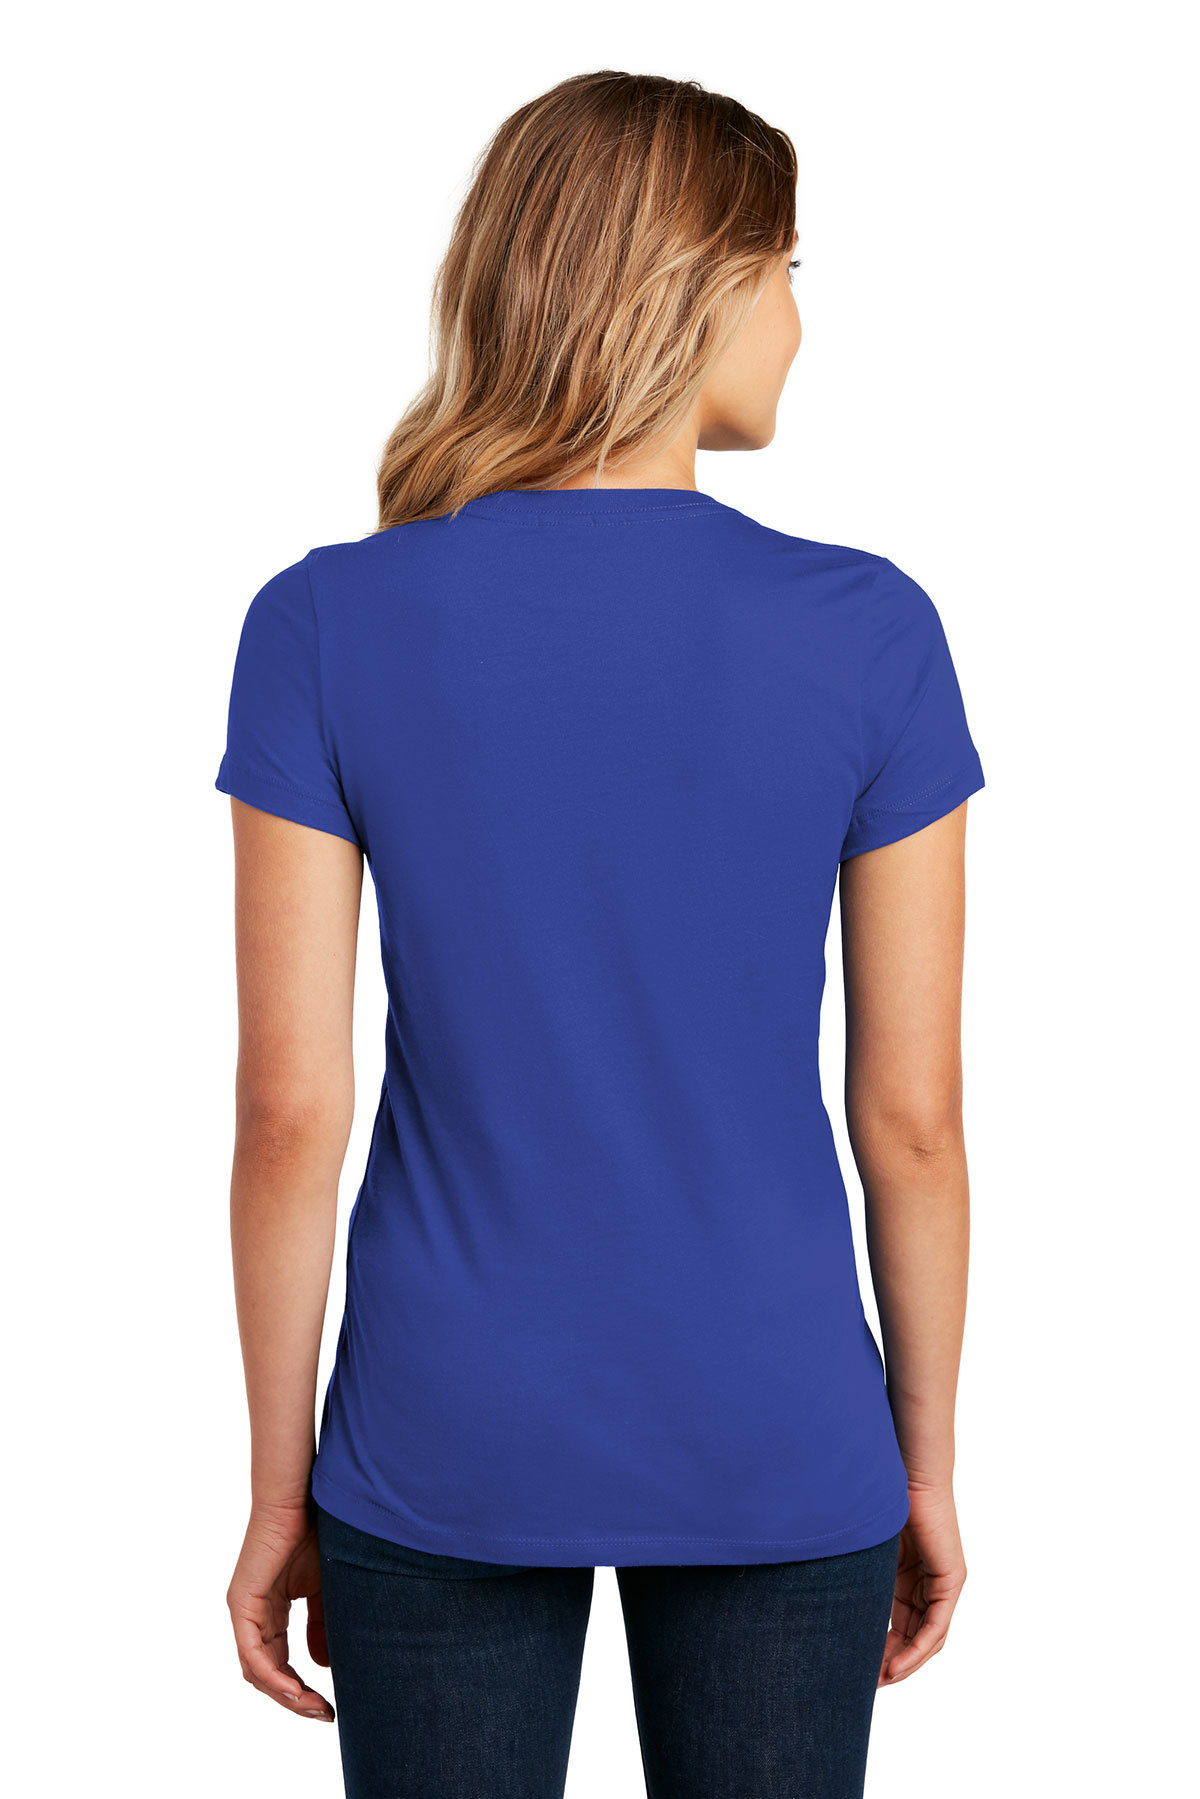 District Women’s Perfect Weight Tee | Product | Company Casuals